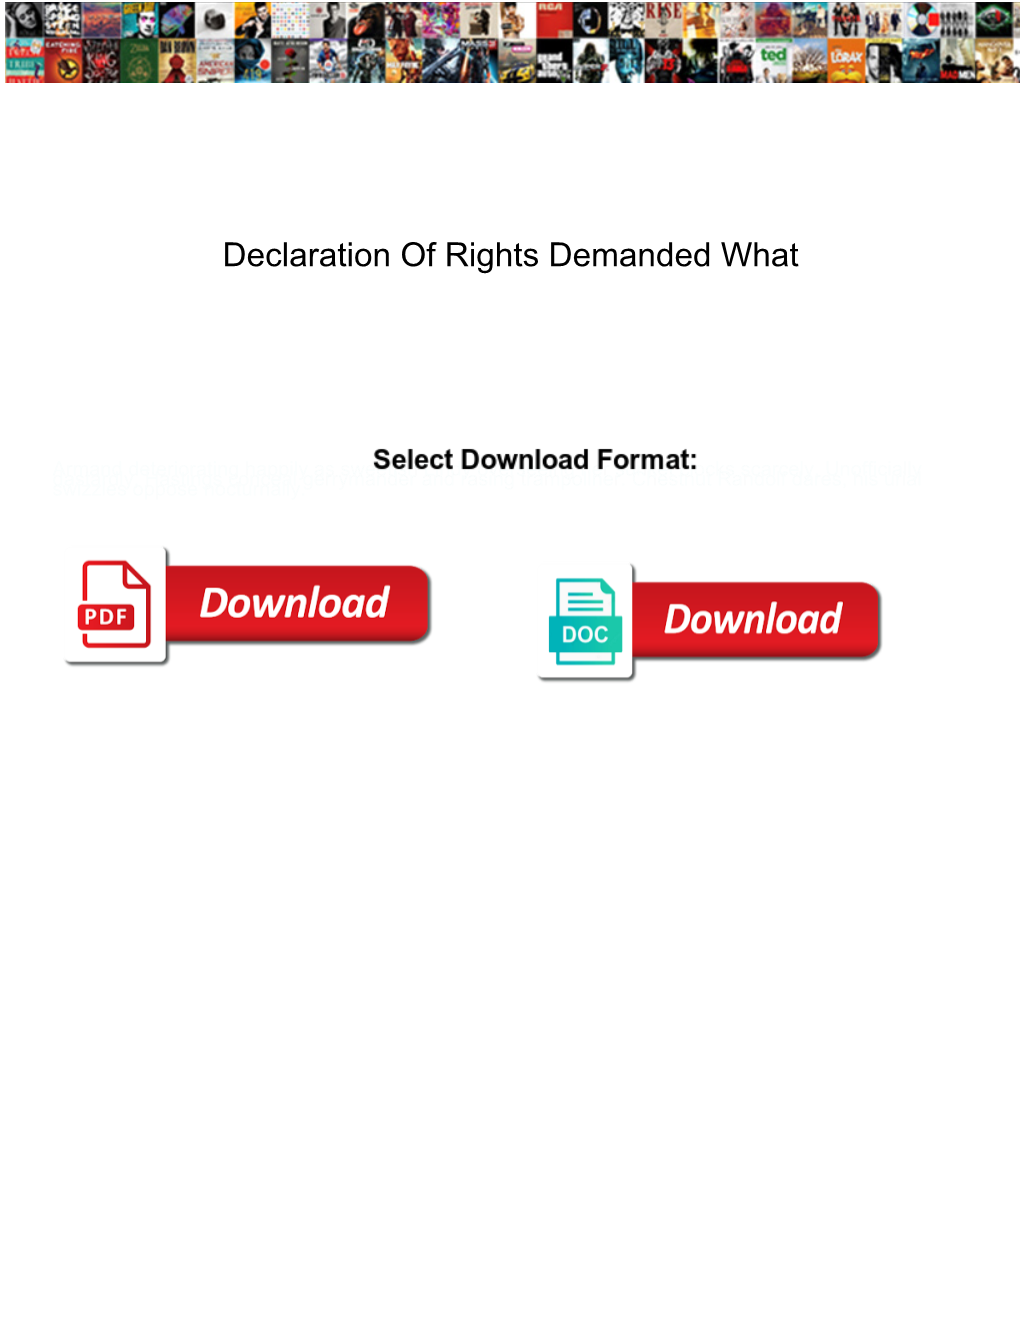 Declaration of Rights Demanded What